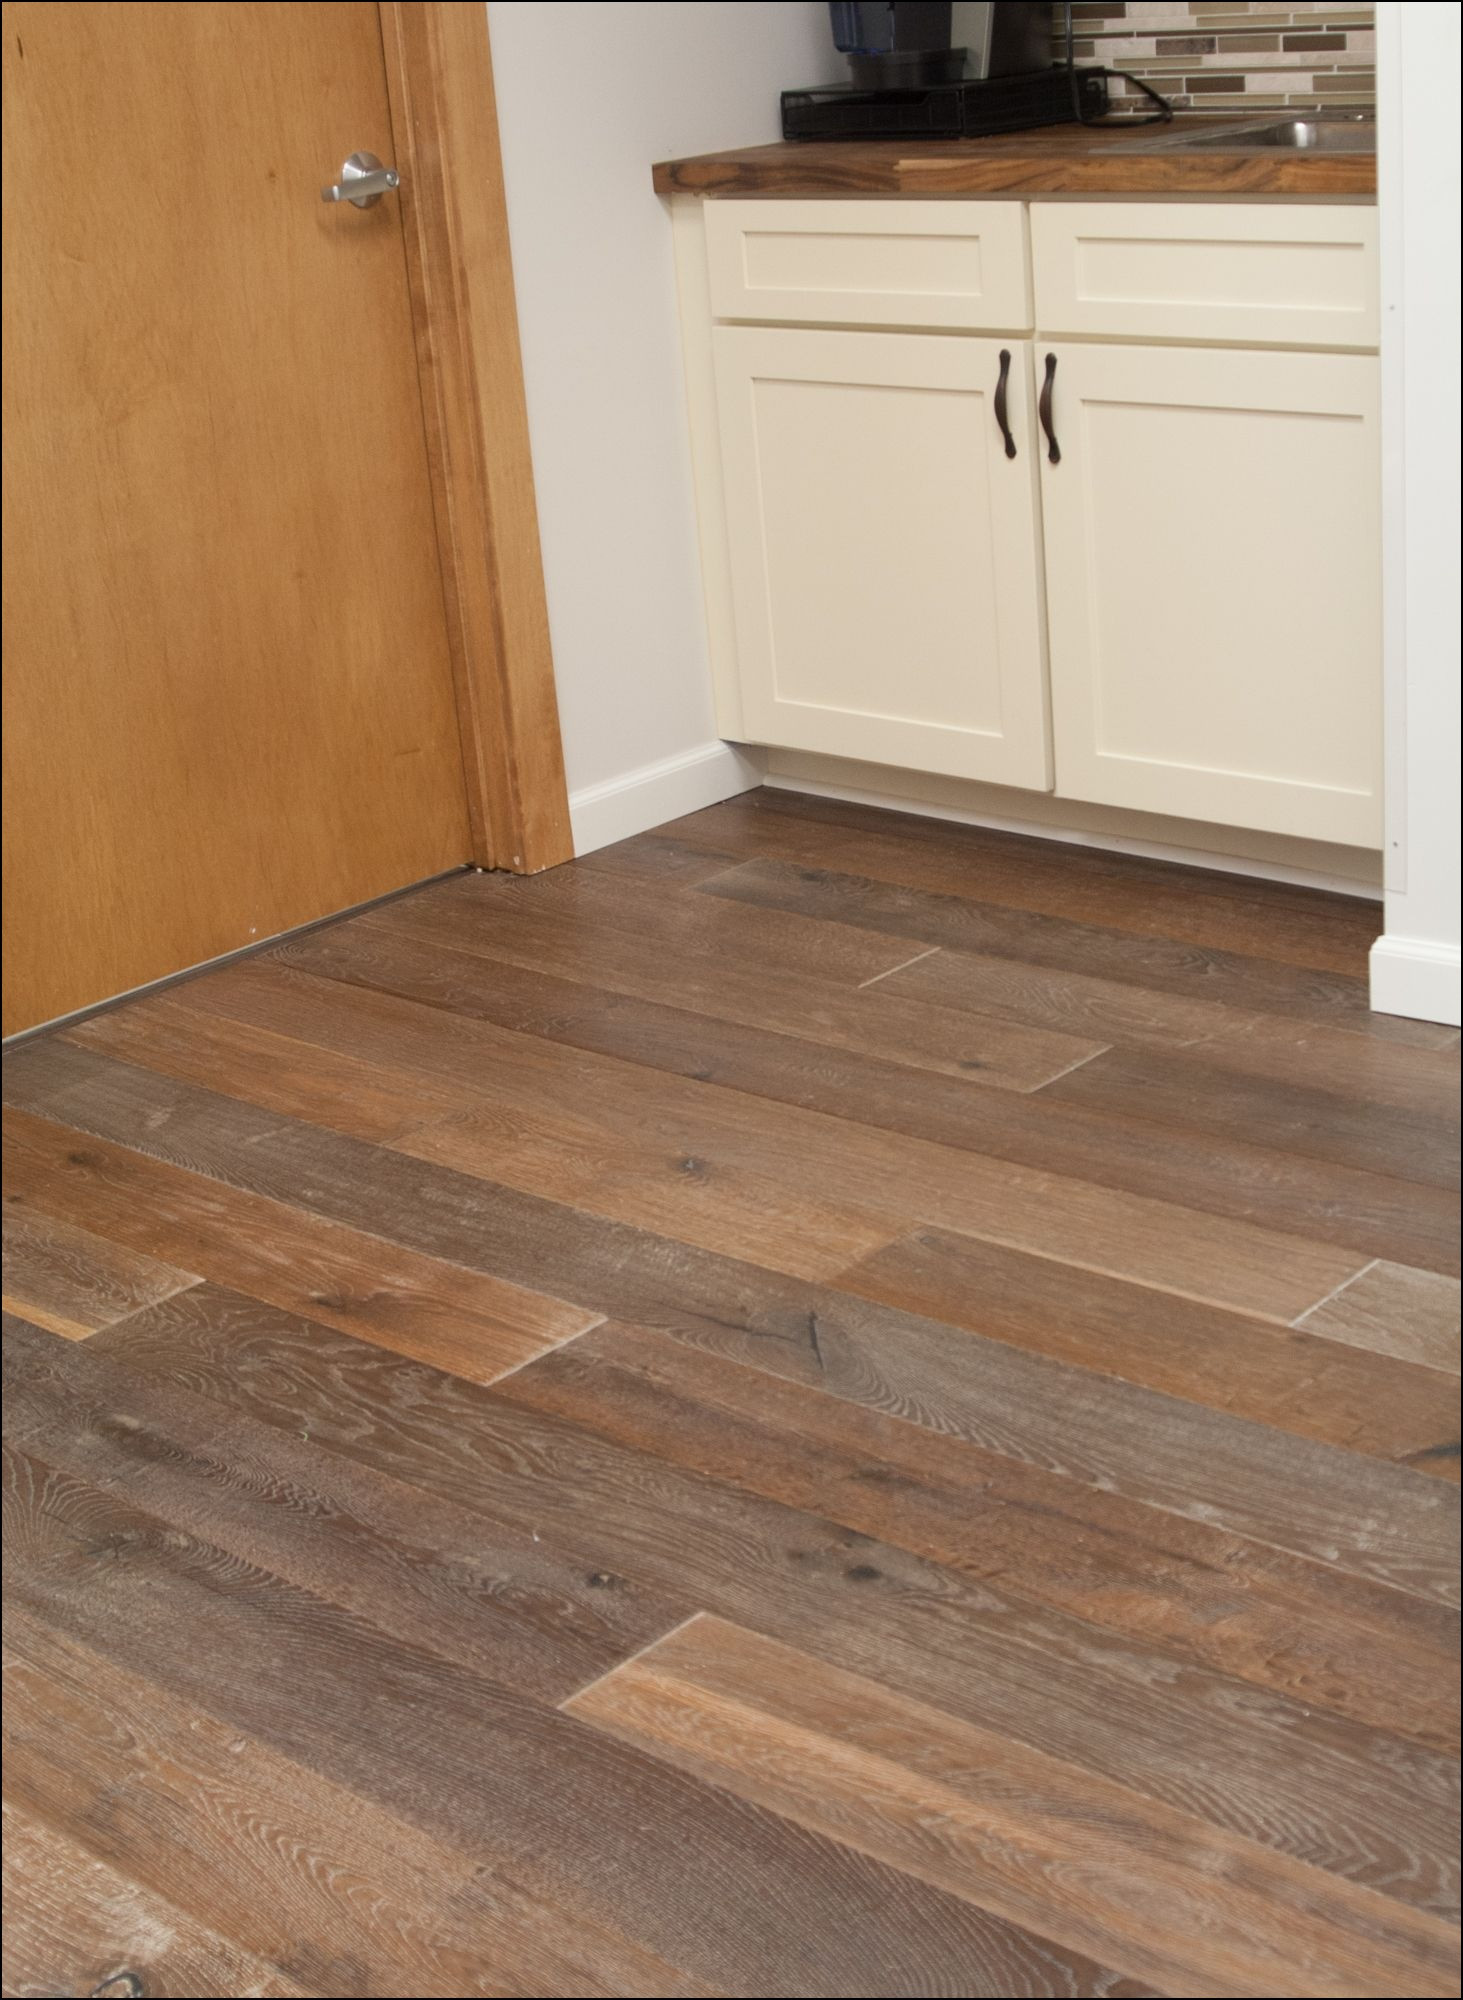 15 Recommended Hardwood Flooring Sale Uk 2024 free download hardwood flooring sale uk of hardwood flooring suppliers france flooring ideas intended for hardwood flooring pictures in homes stock vintage white oak costa hardwood floor home ideas of har